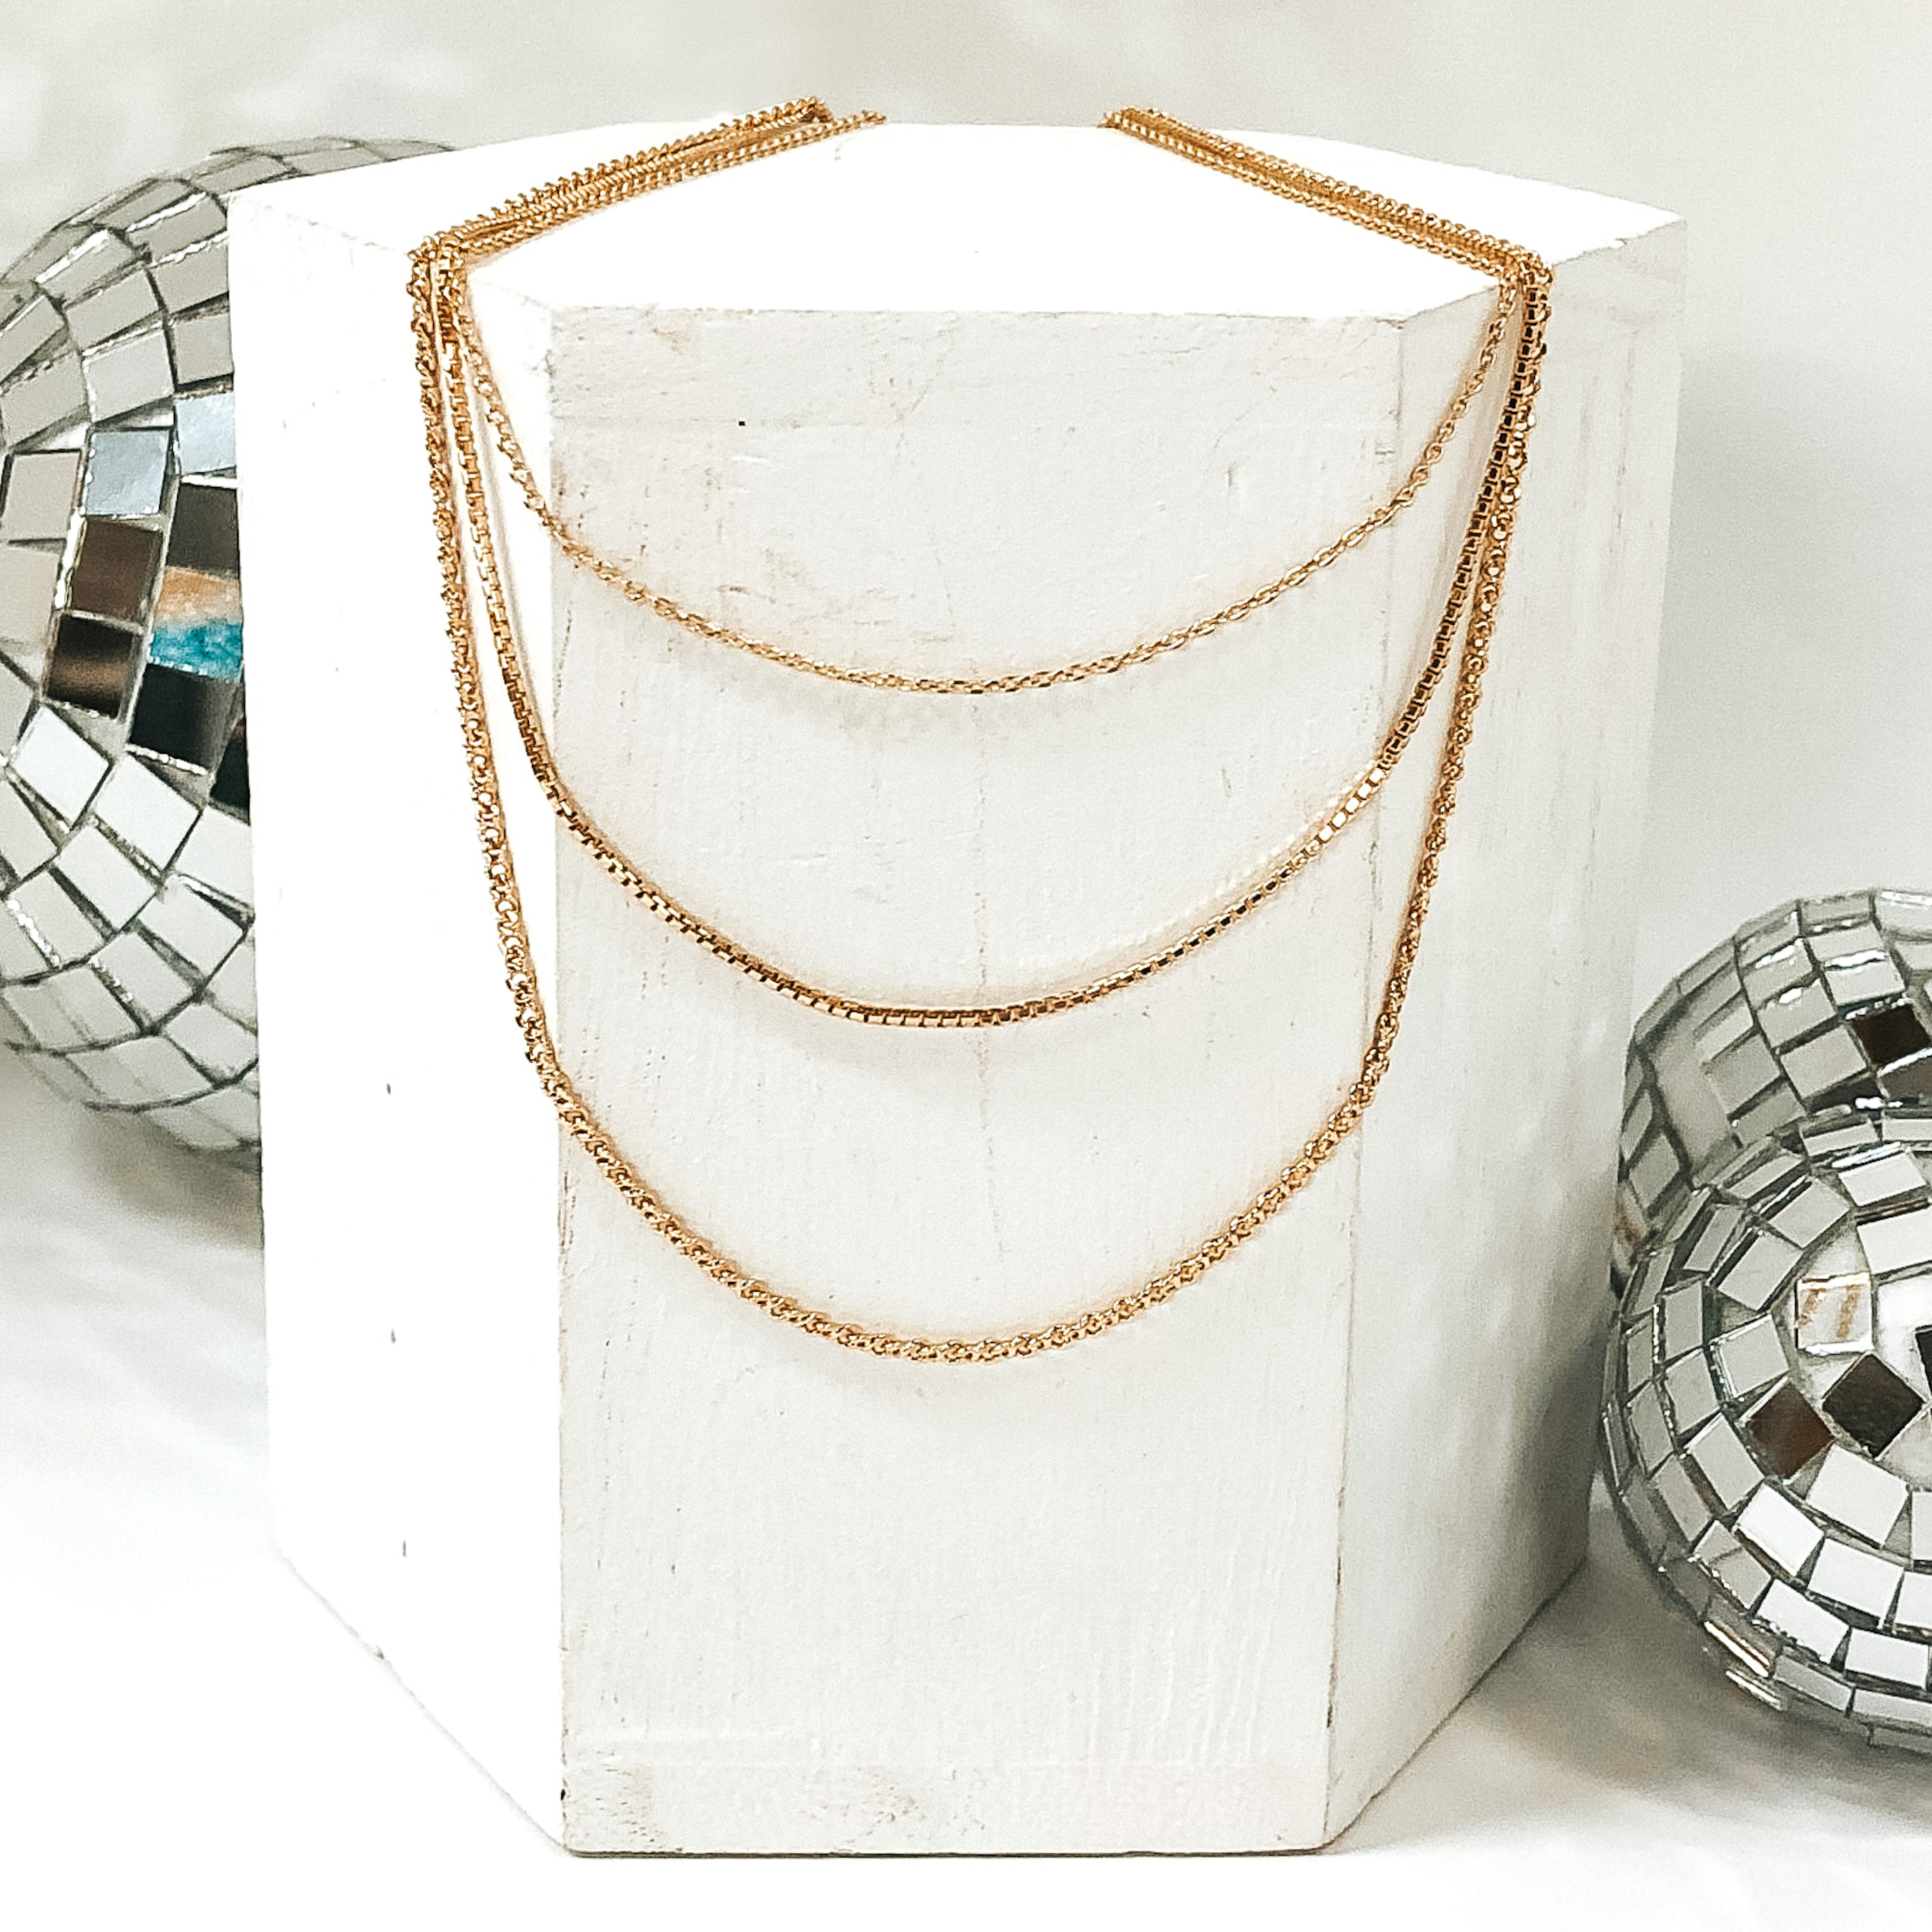 3 piece multi chained necklaces in gold